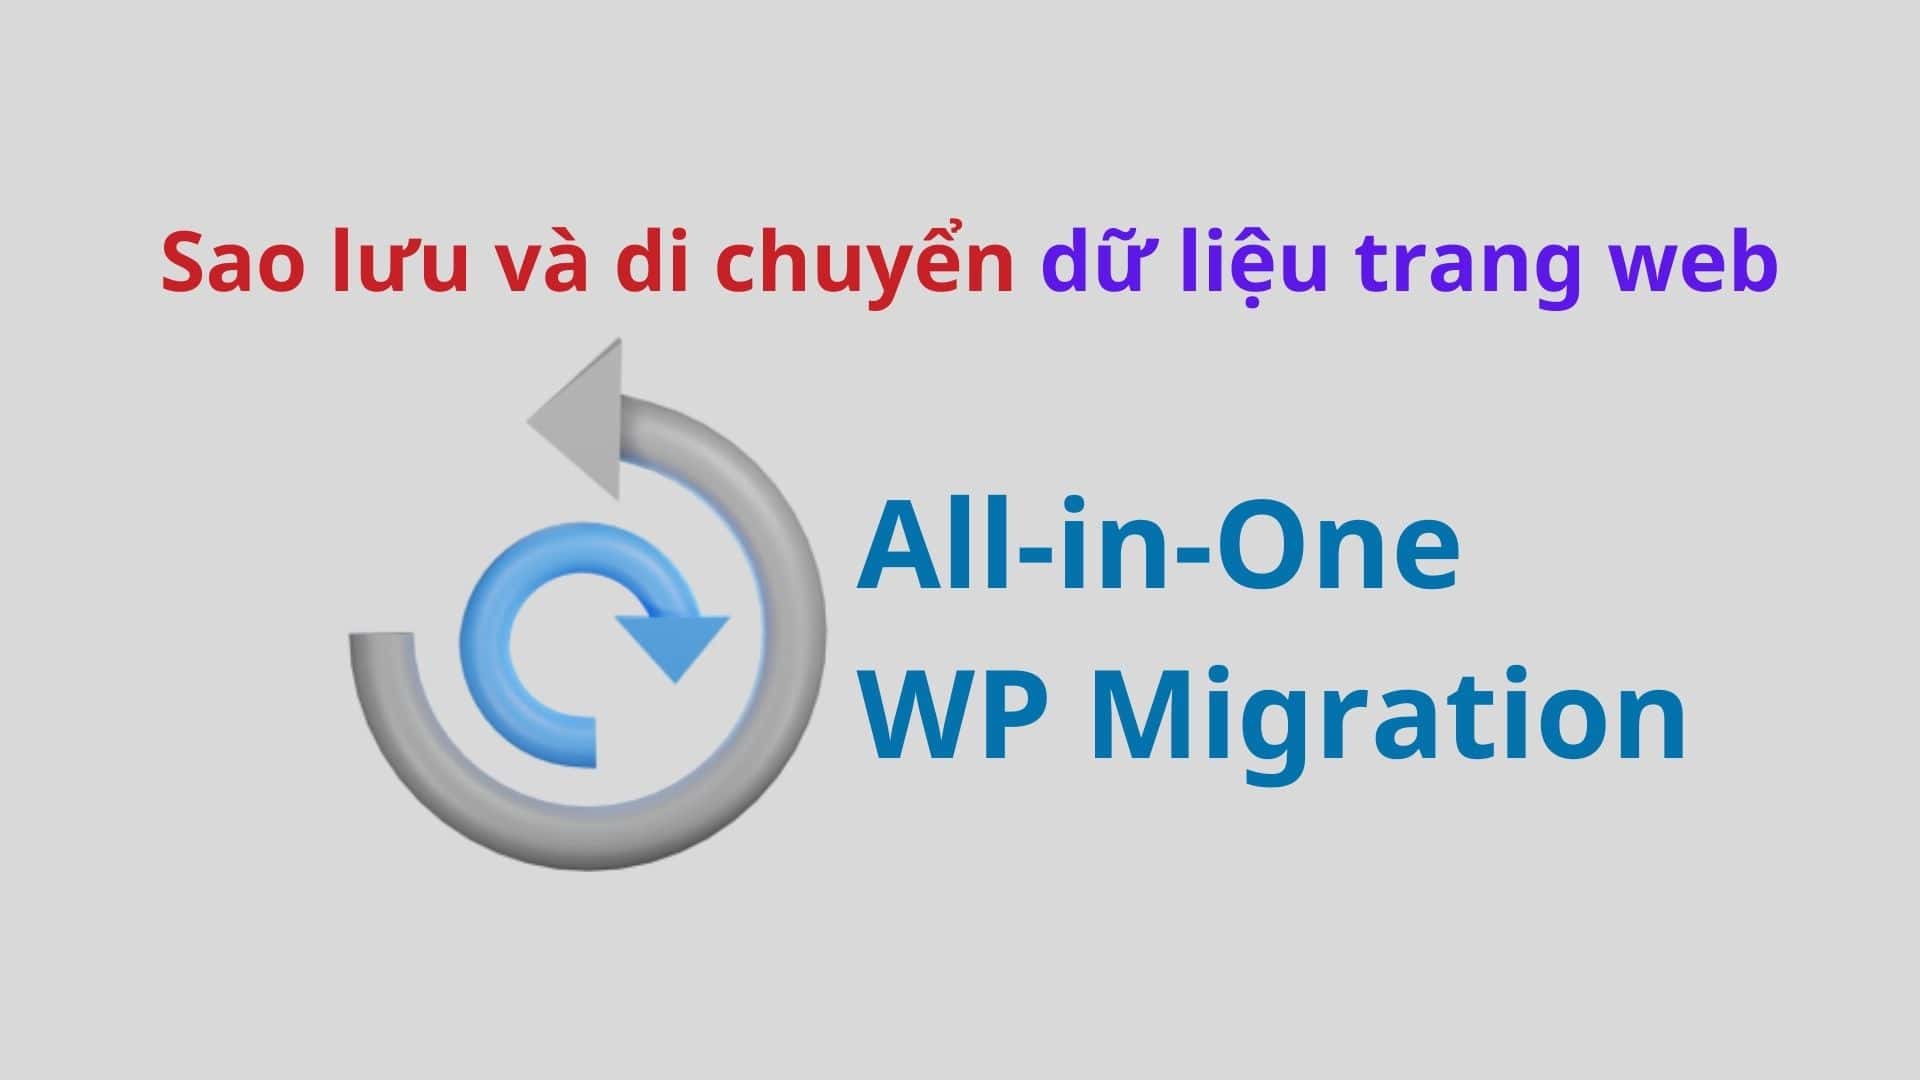 All-in-One WP Migration